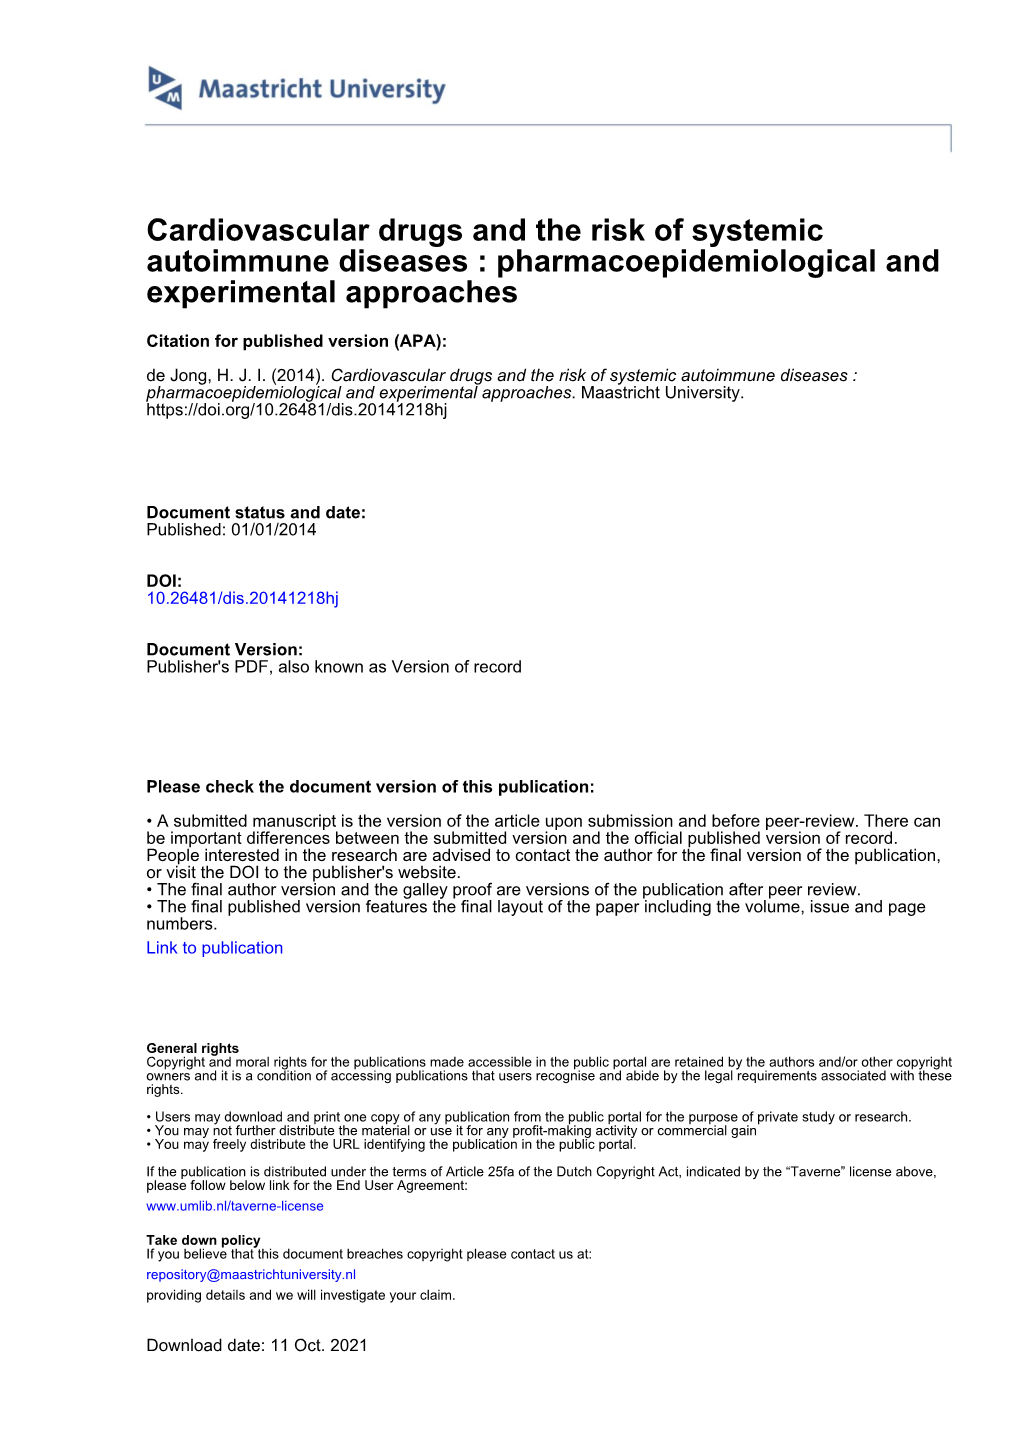 Cardiovascular Drugs and the Risk of Systemic Autoimmune Diseases : Pharmacoepidemiological and Experimental Approaches